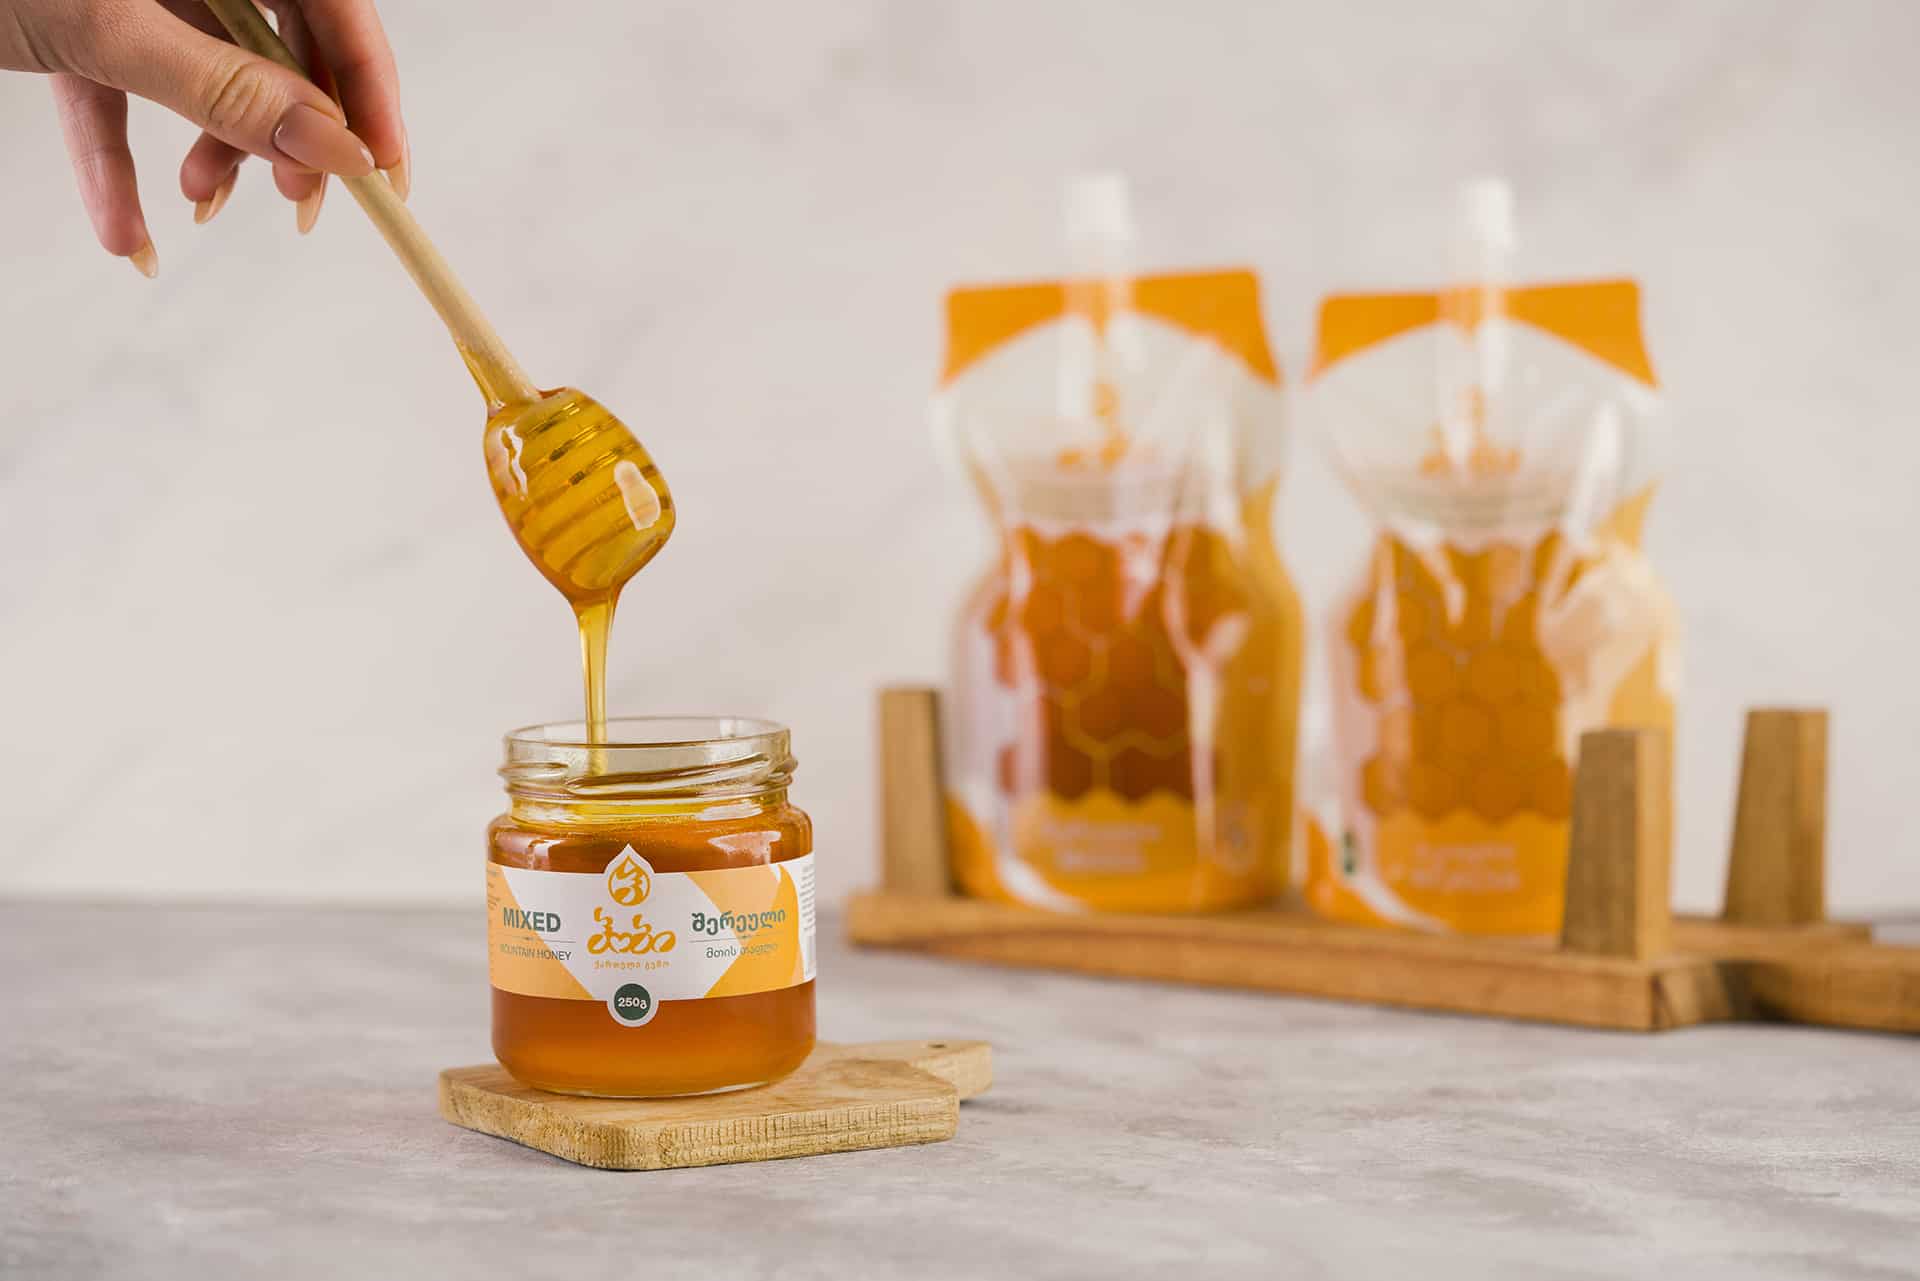 HOBY - purest and most natural honey